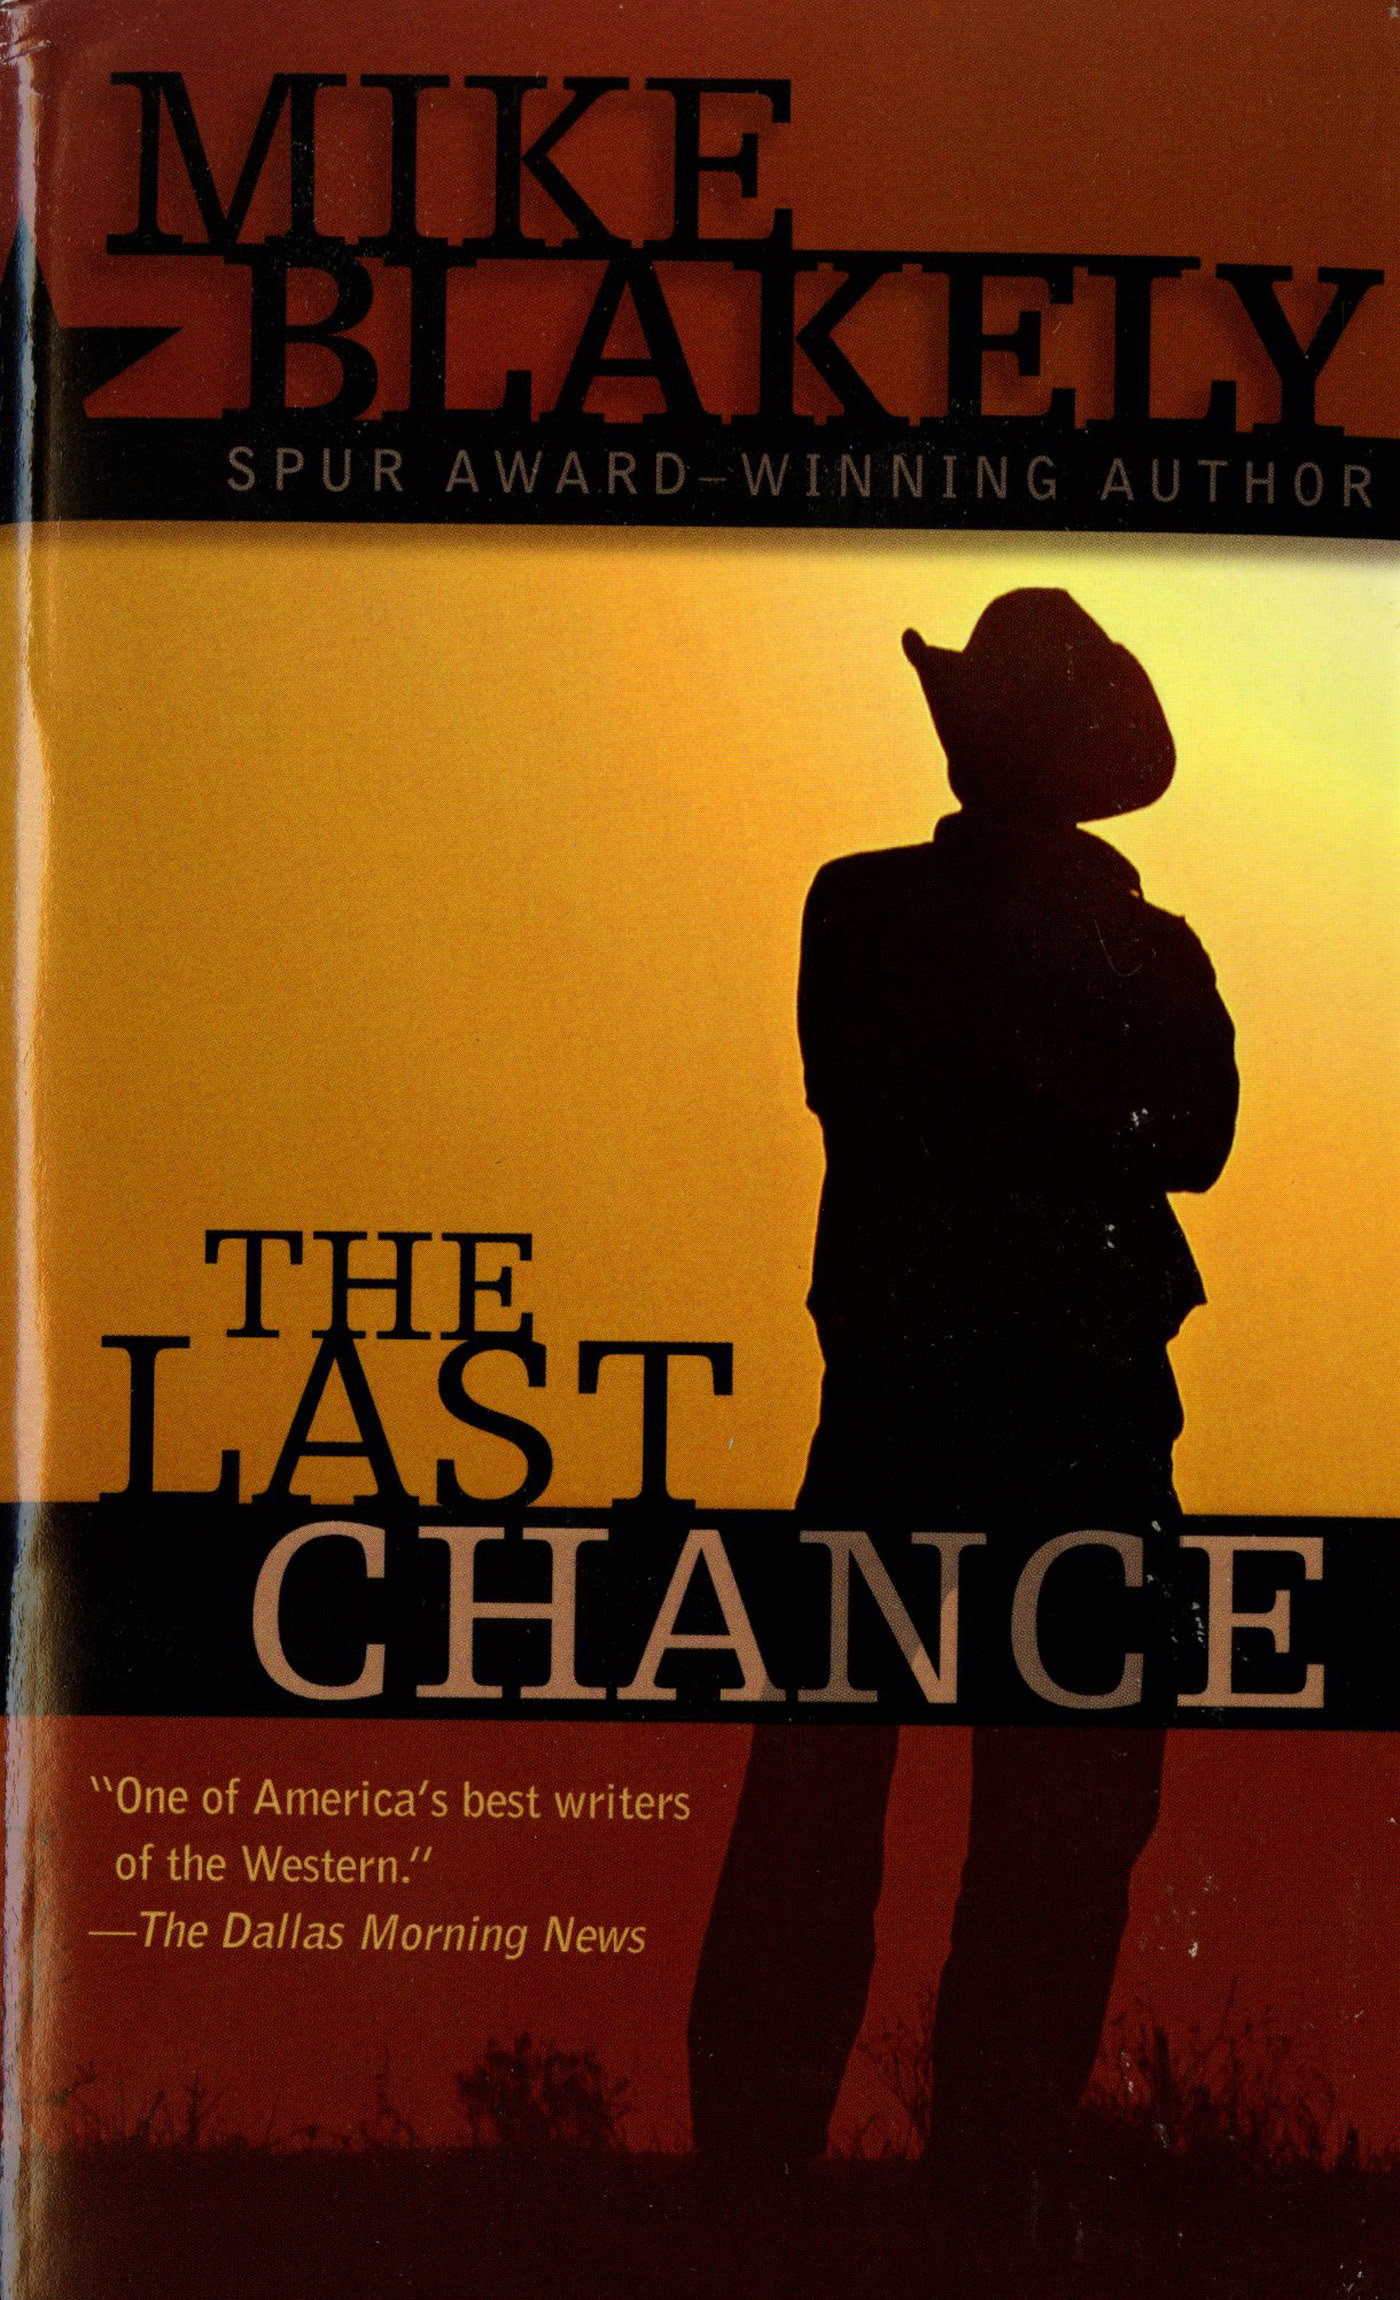 The Last Chance by Mike Blakely